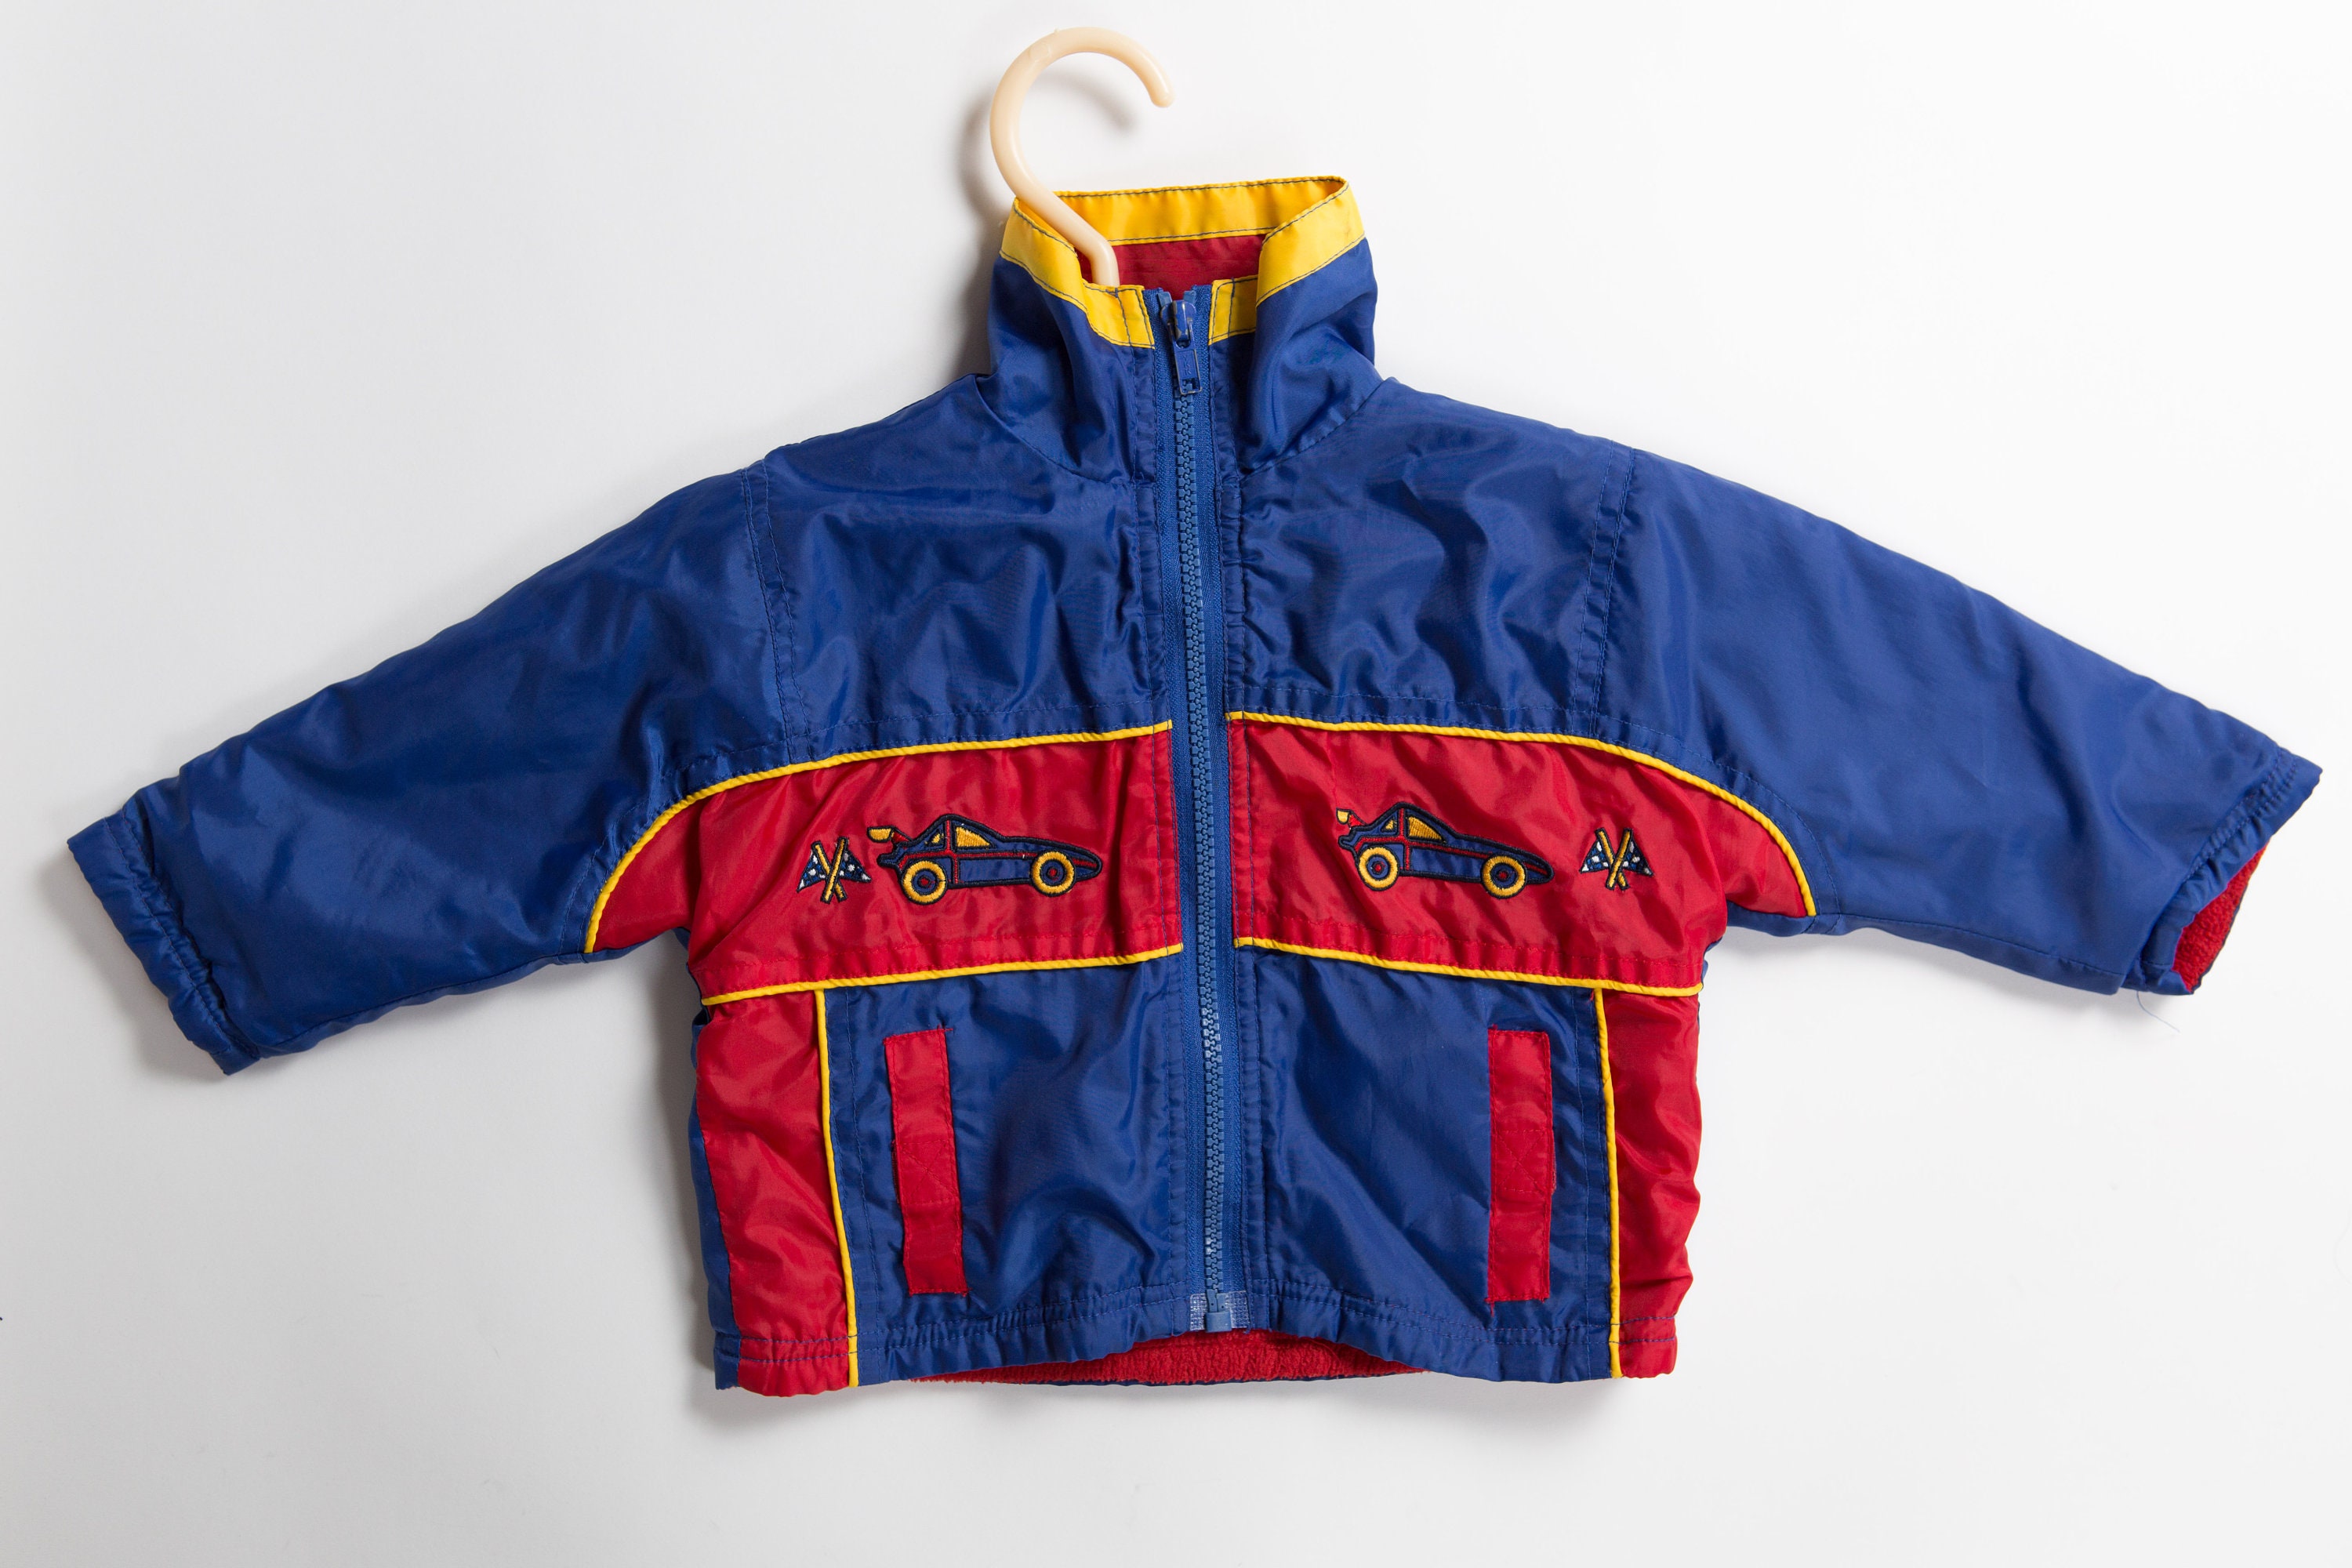 Boys Vintage Jacket - 80's/90's Color Block Toddler Coat with